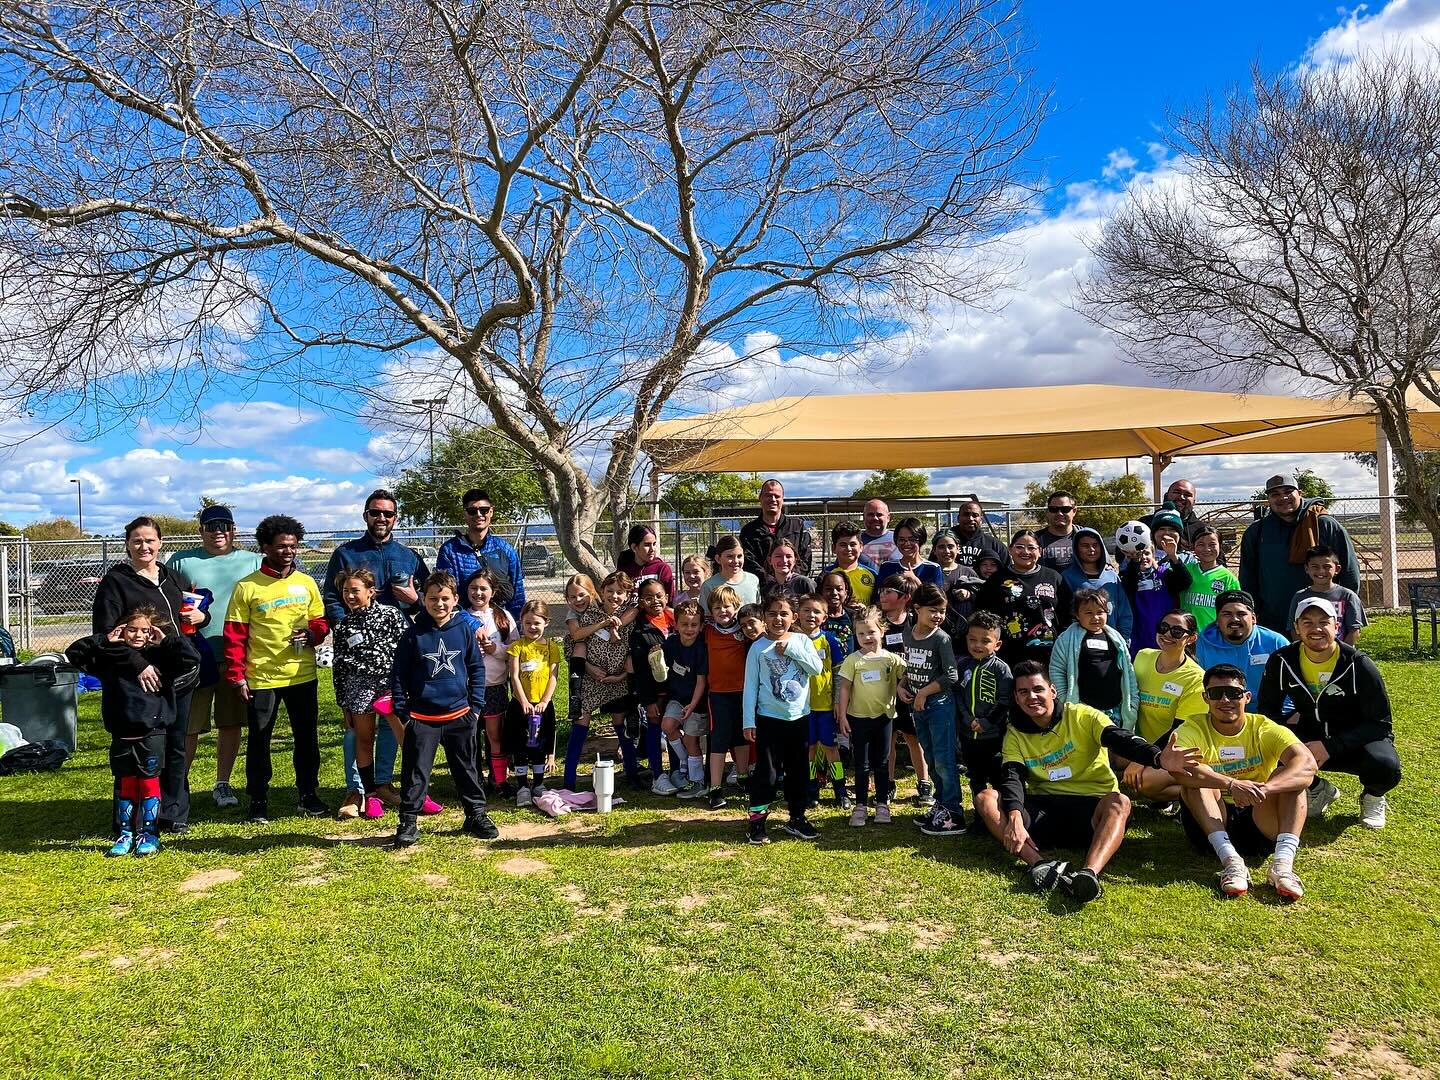 Thank you Yuma &amp; thank you @bgea for letting us be a small part of the God Loves You Frontera Tour! We are always a yes when it involves kids, soccer &amp; the gospel!